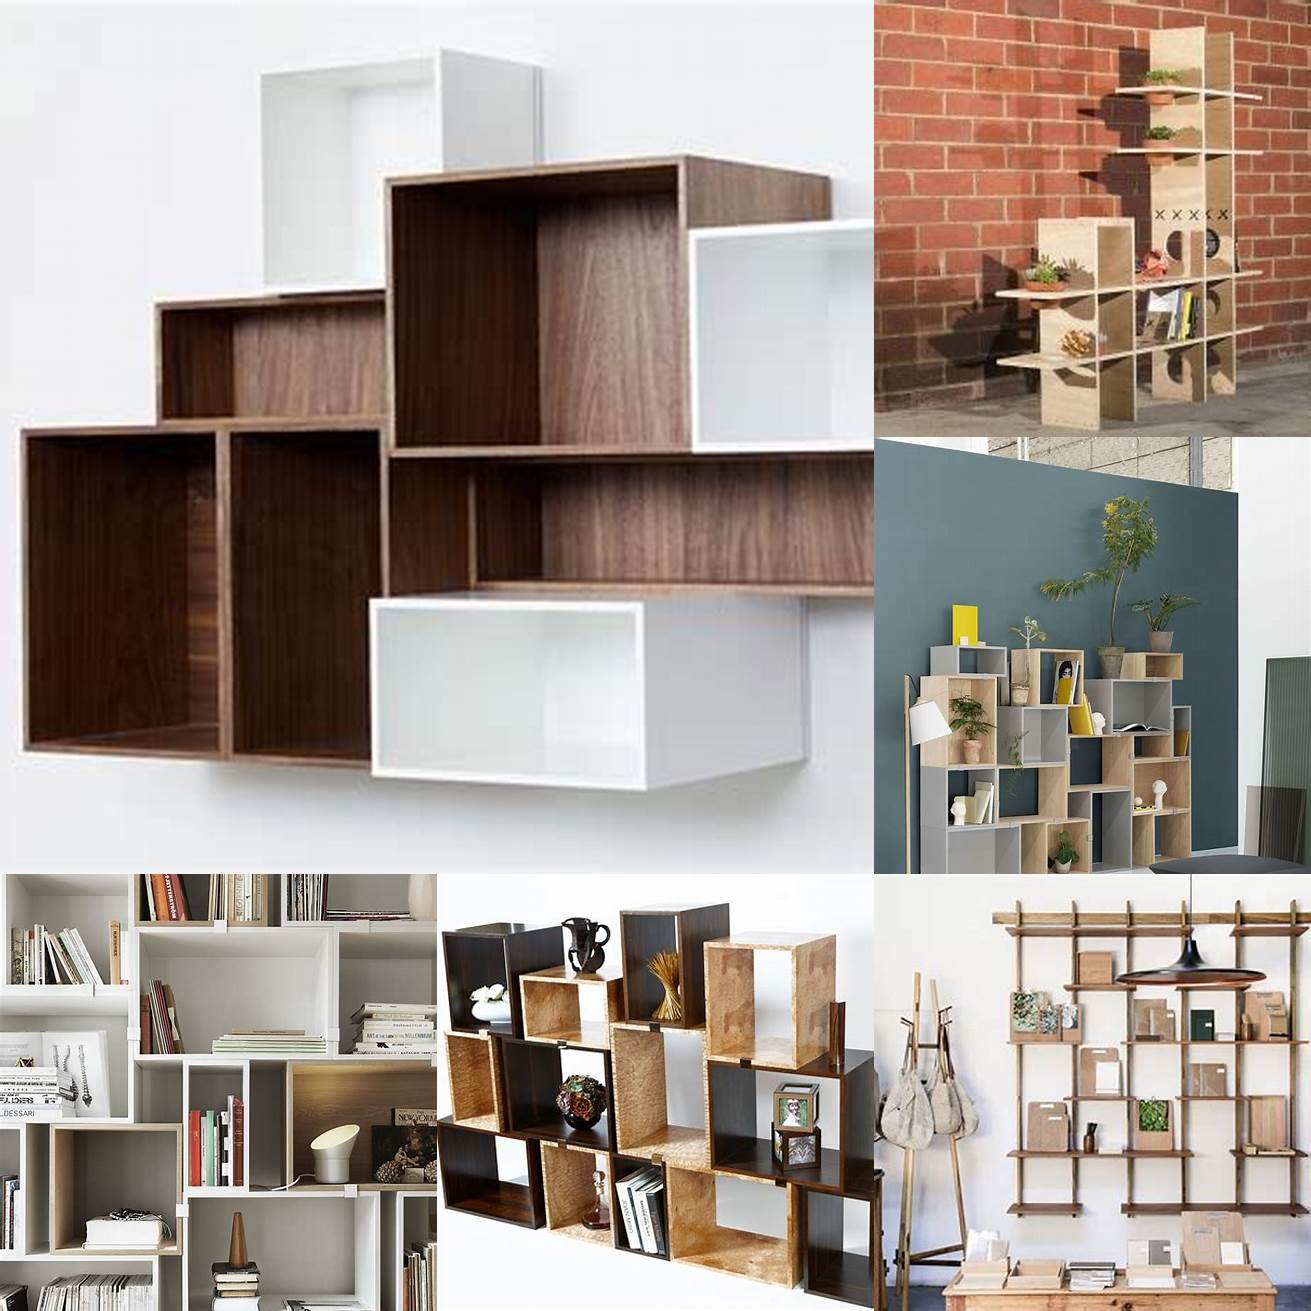 Modular shelving can be arranged in different configurations to serve multiple purposes